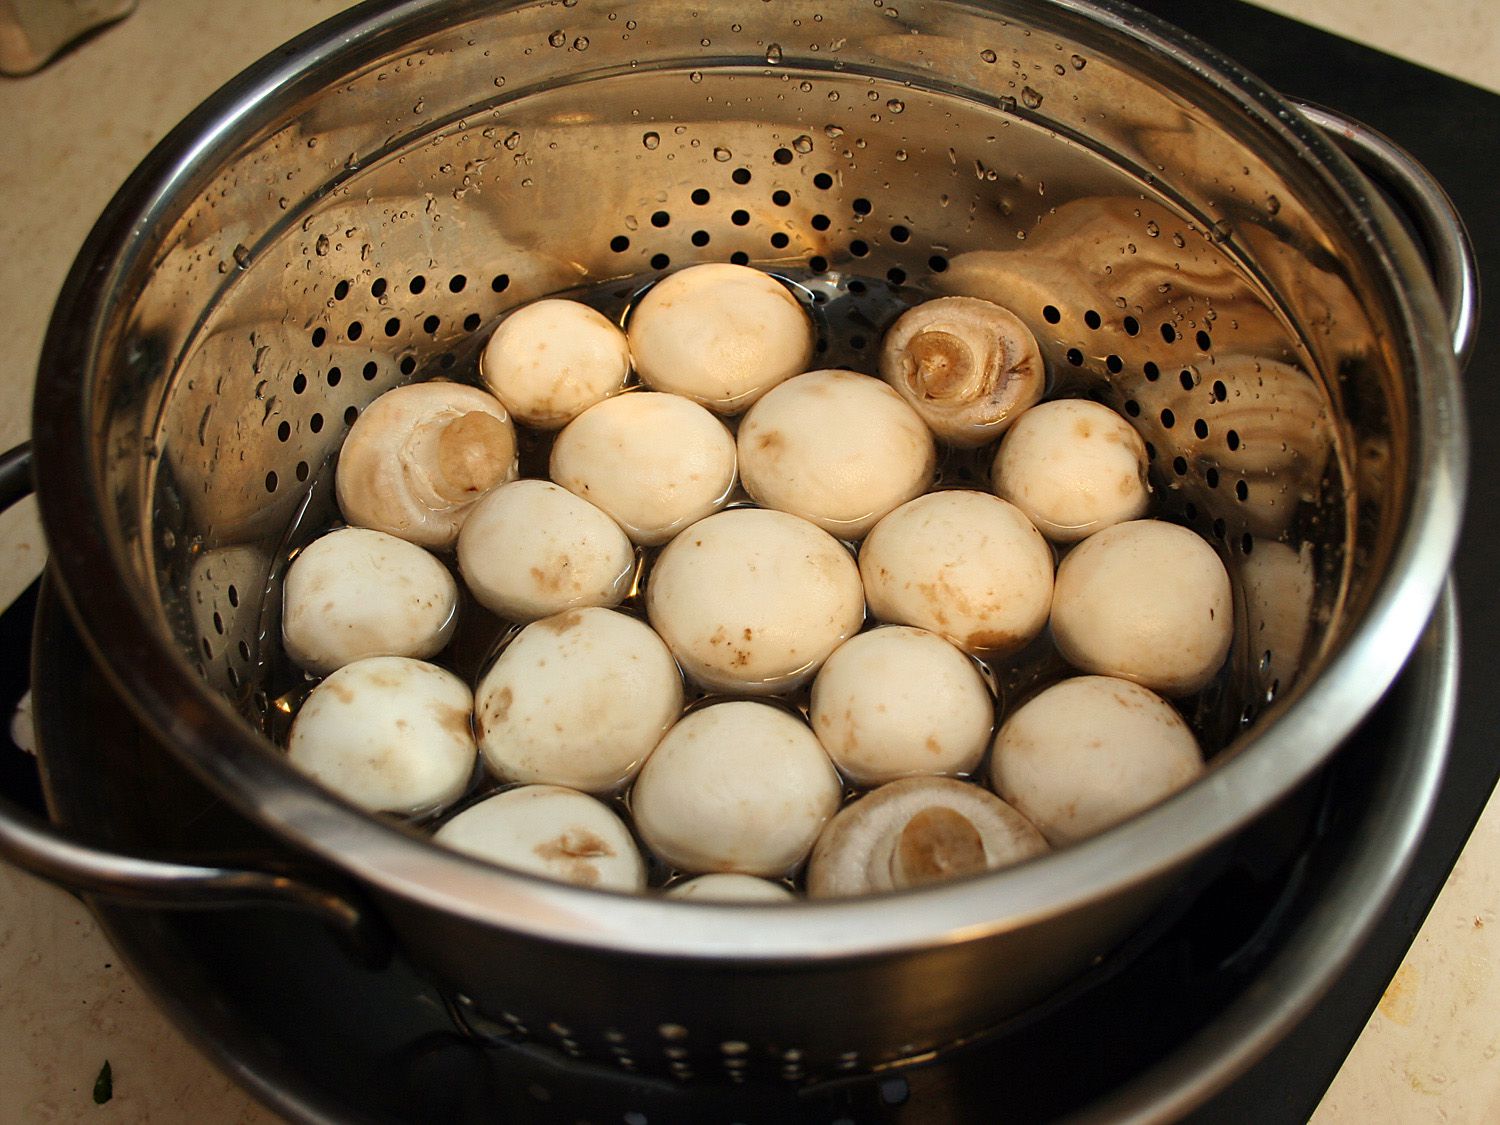 A New Way to Cook Mushrooms